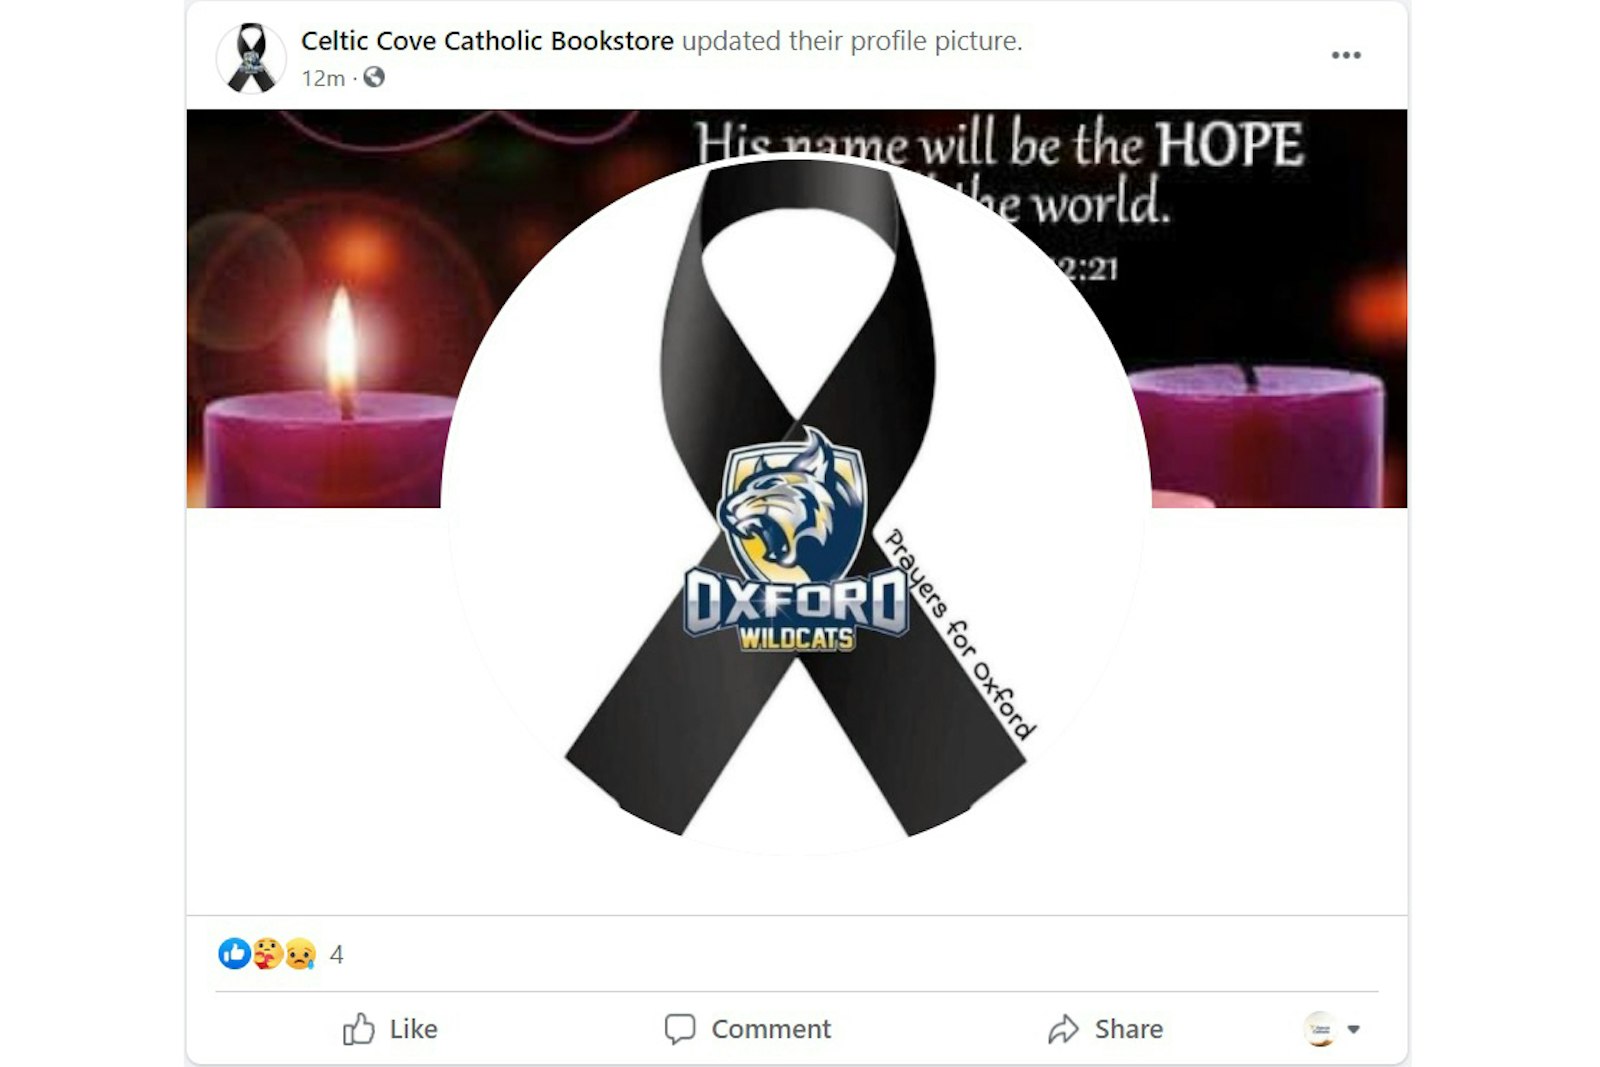 A Facebook post from Celtic Cove Catholic Bookstore in Oxford asks for prayers for victims of a school shooting Wednesday, Nov. 30, that claimed the lives of three students and wounded at least eight others at Oxford High School in northern Oakland County. (Screengrab via Facebook)